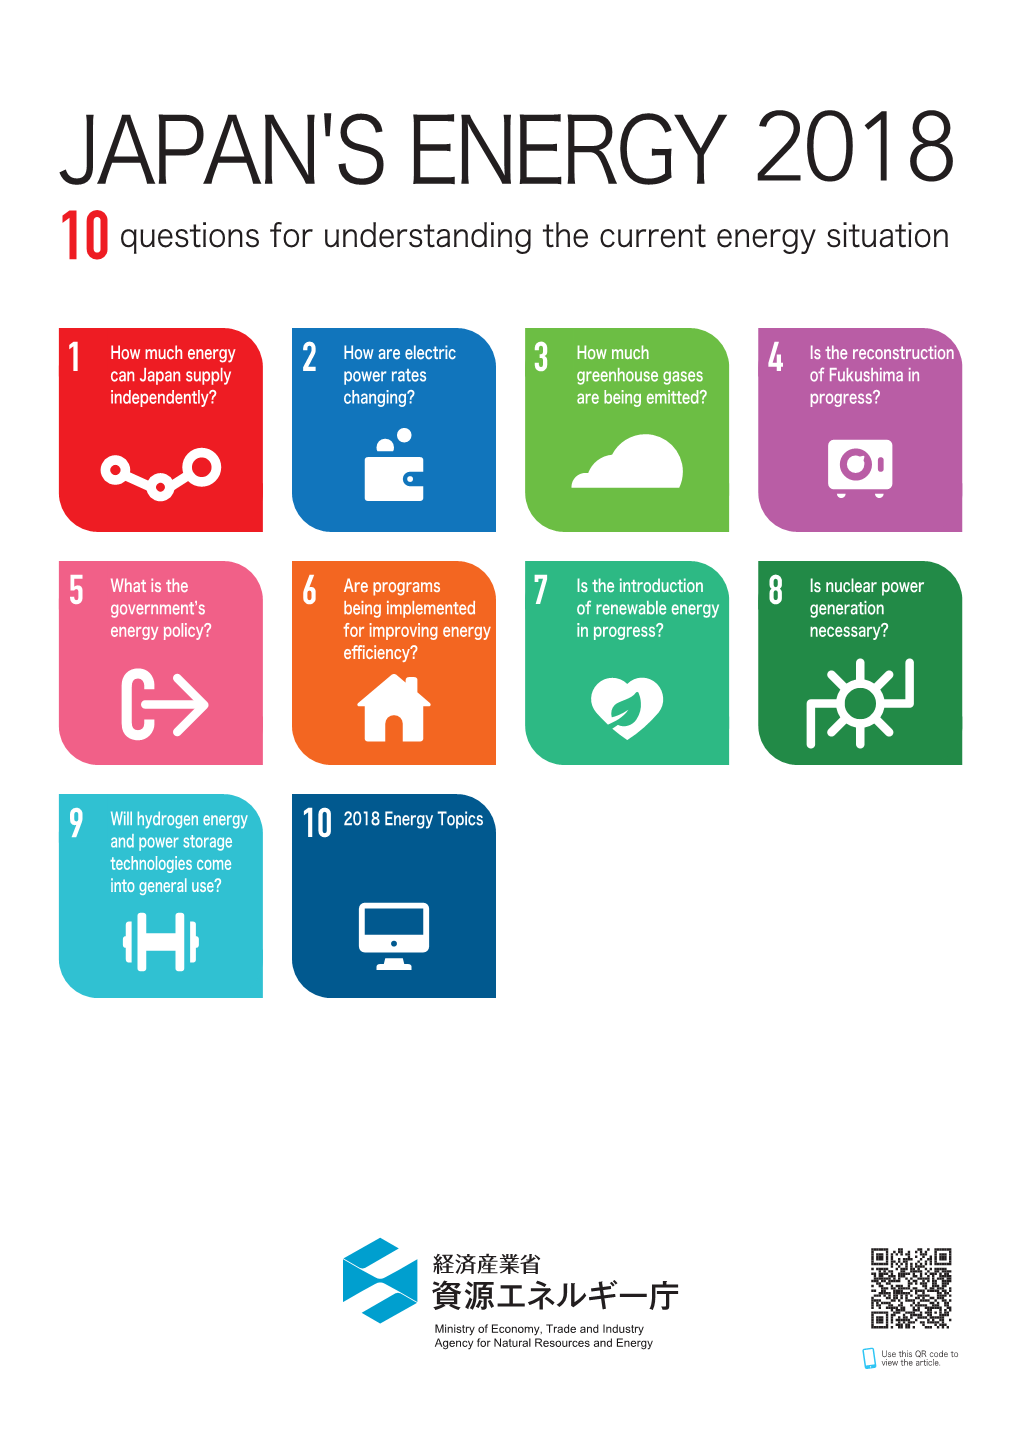 JAPAN's ENERGY 2018 10 Questions for Understanding the Current Energy Situation